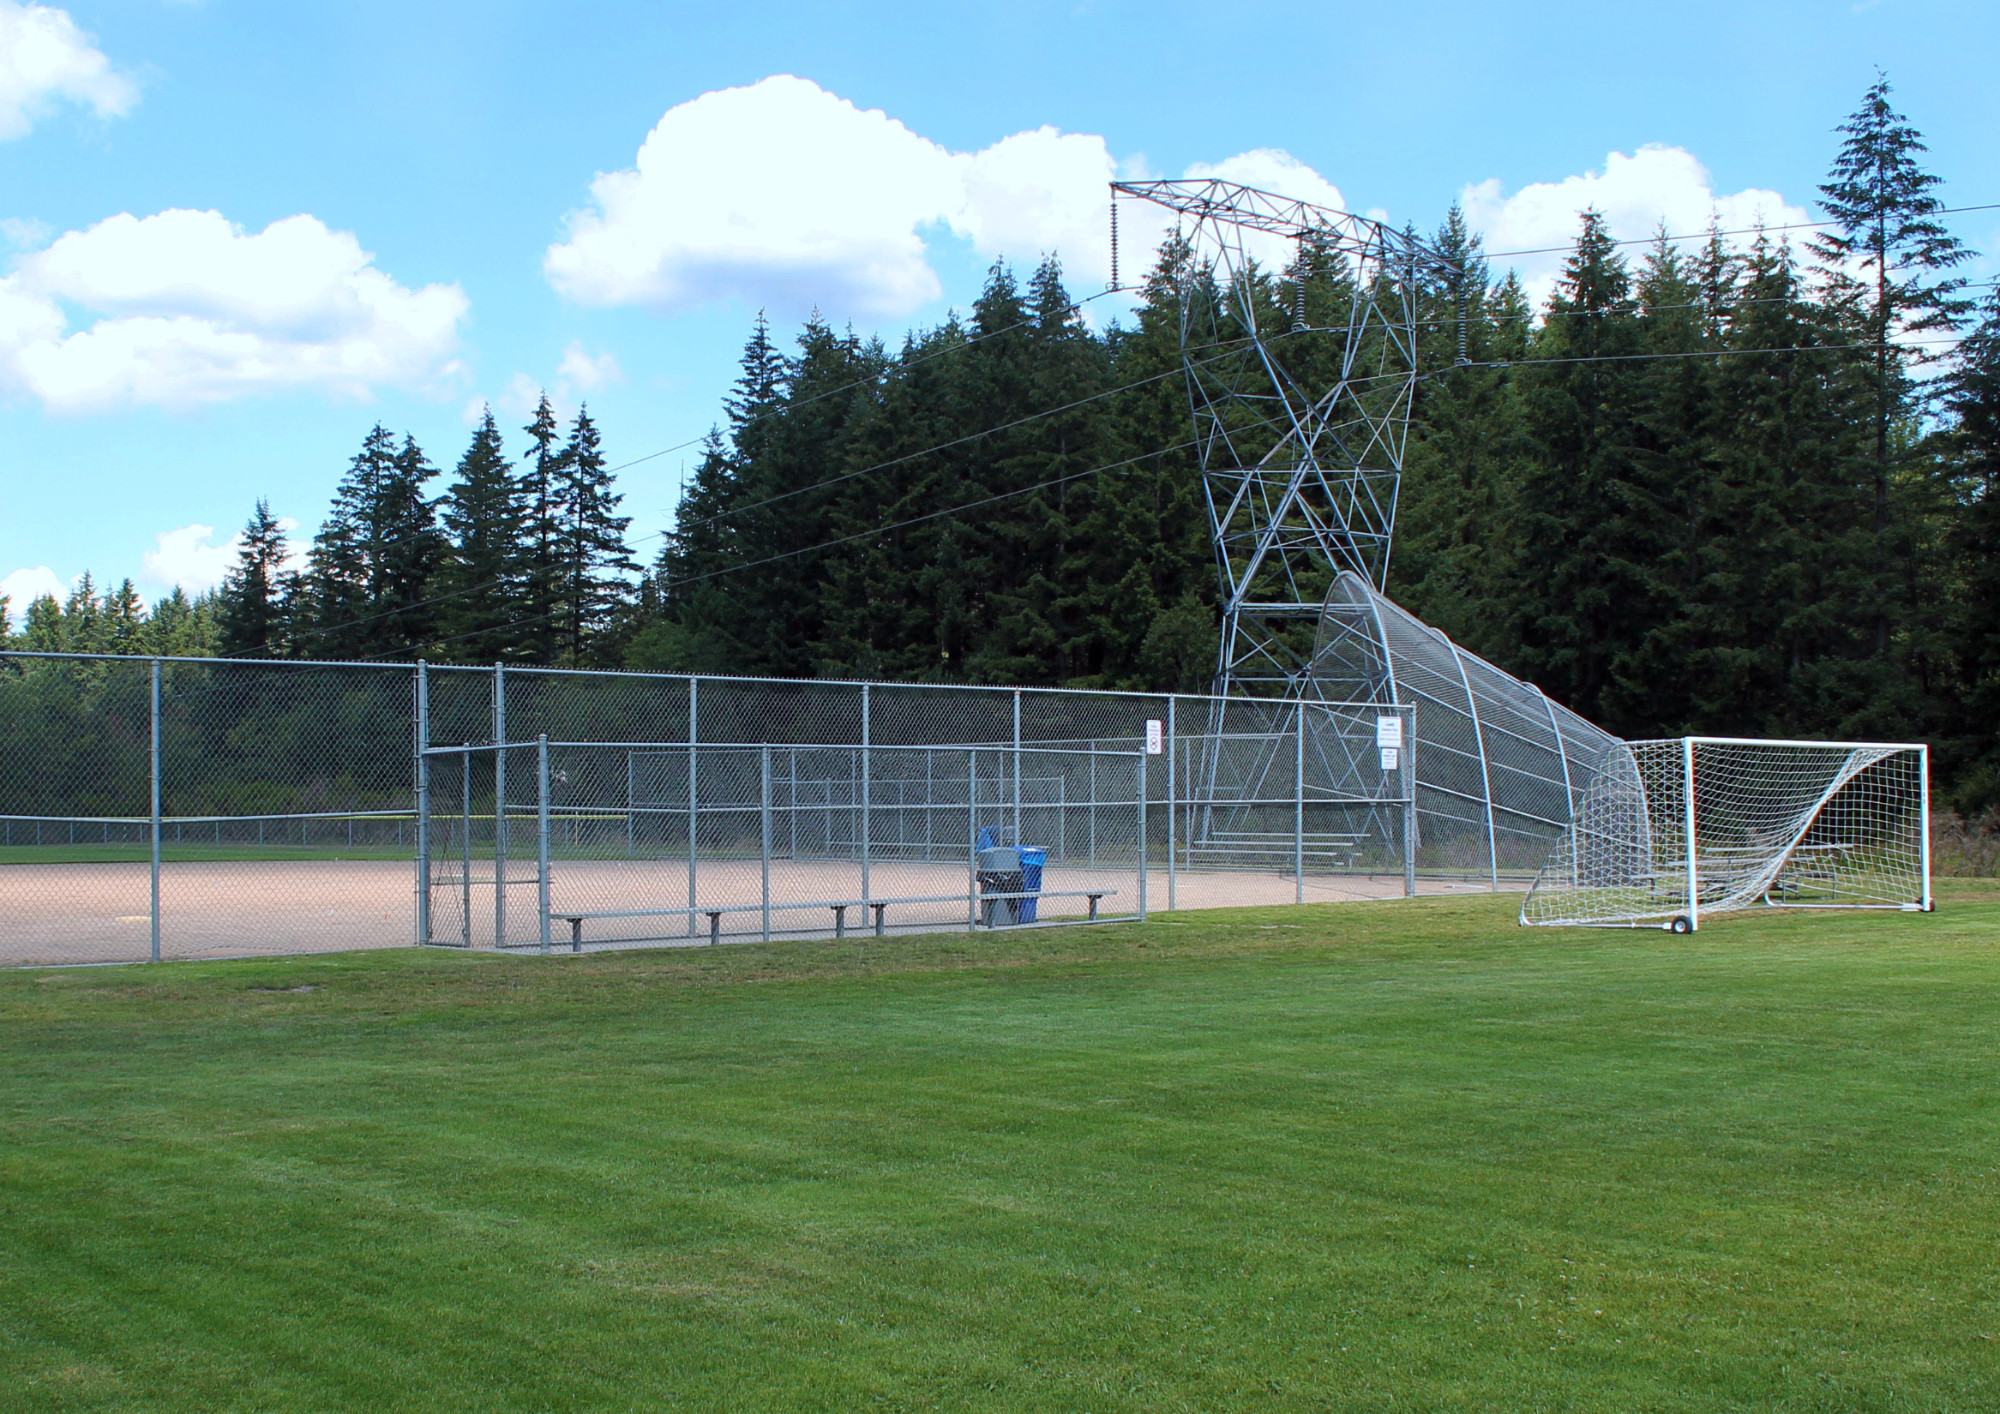 Baseball field at Klahanie Park in Sammamish surrounded by large grassy area. Coniferous trees and a power transmission utility pole are in the background.